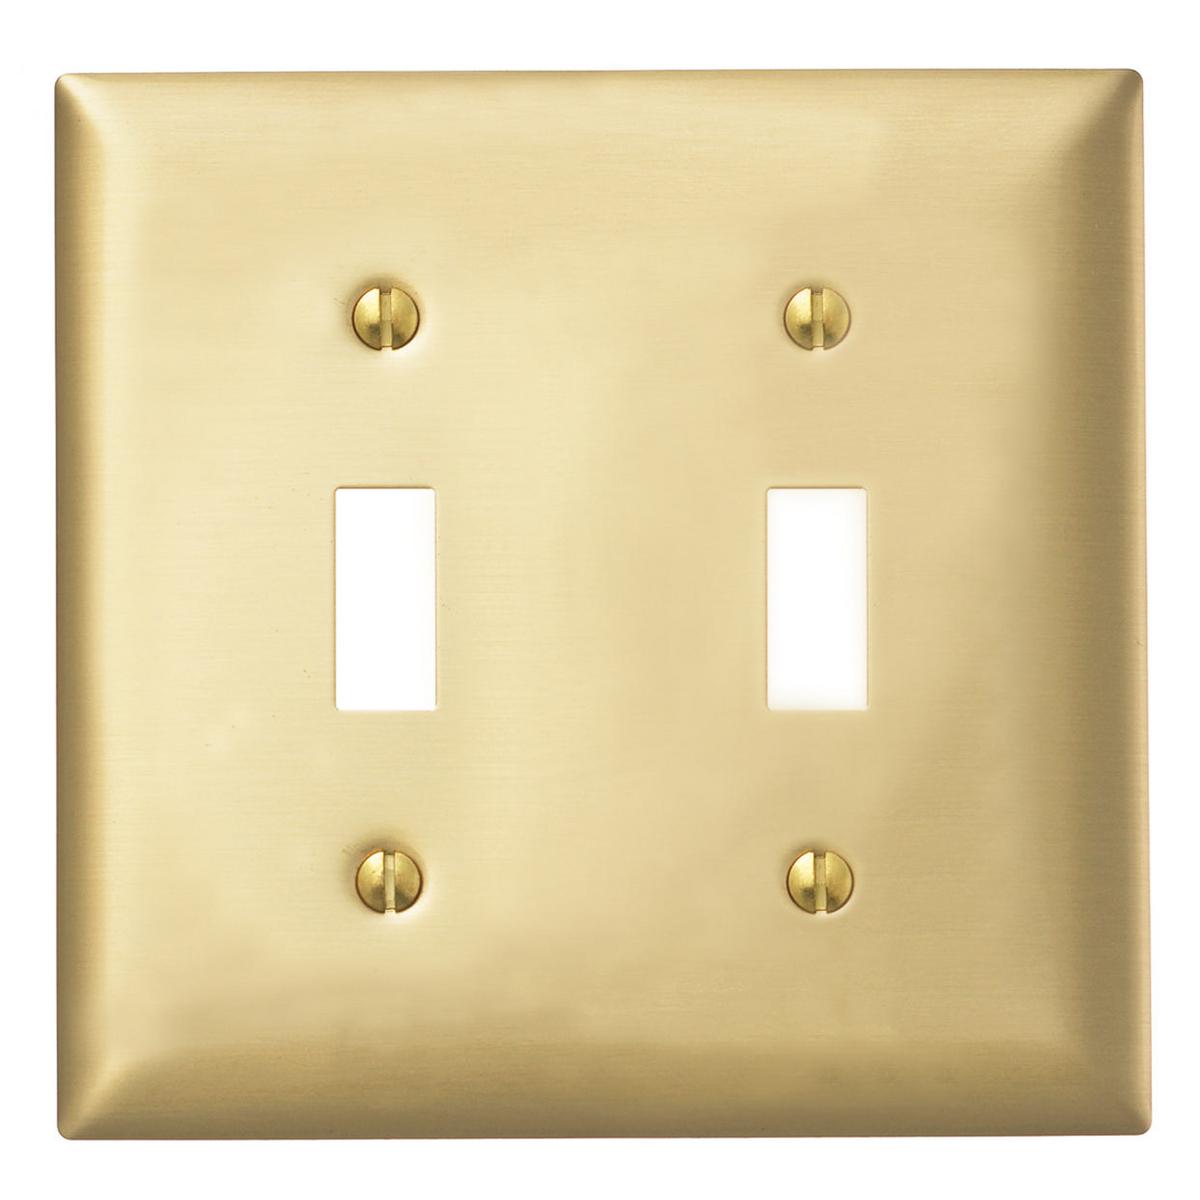 Hubbell SBP2 Wallplates and Boxes, Metallic Plates, 2- Gang, 2) Toggle Openings, Standard Size, Brass Plated Steel  ; Non-magnetic and corrosion resistant ; Finish is lacquer coated to inhibit oxidation ; Protective plastic film helps to prevent scratches and damage ;